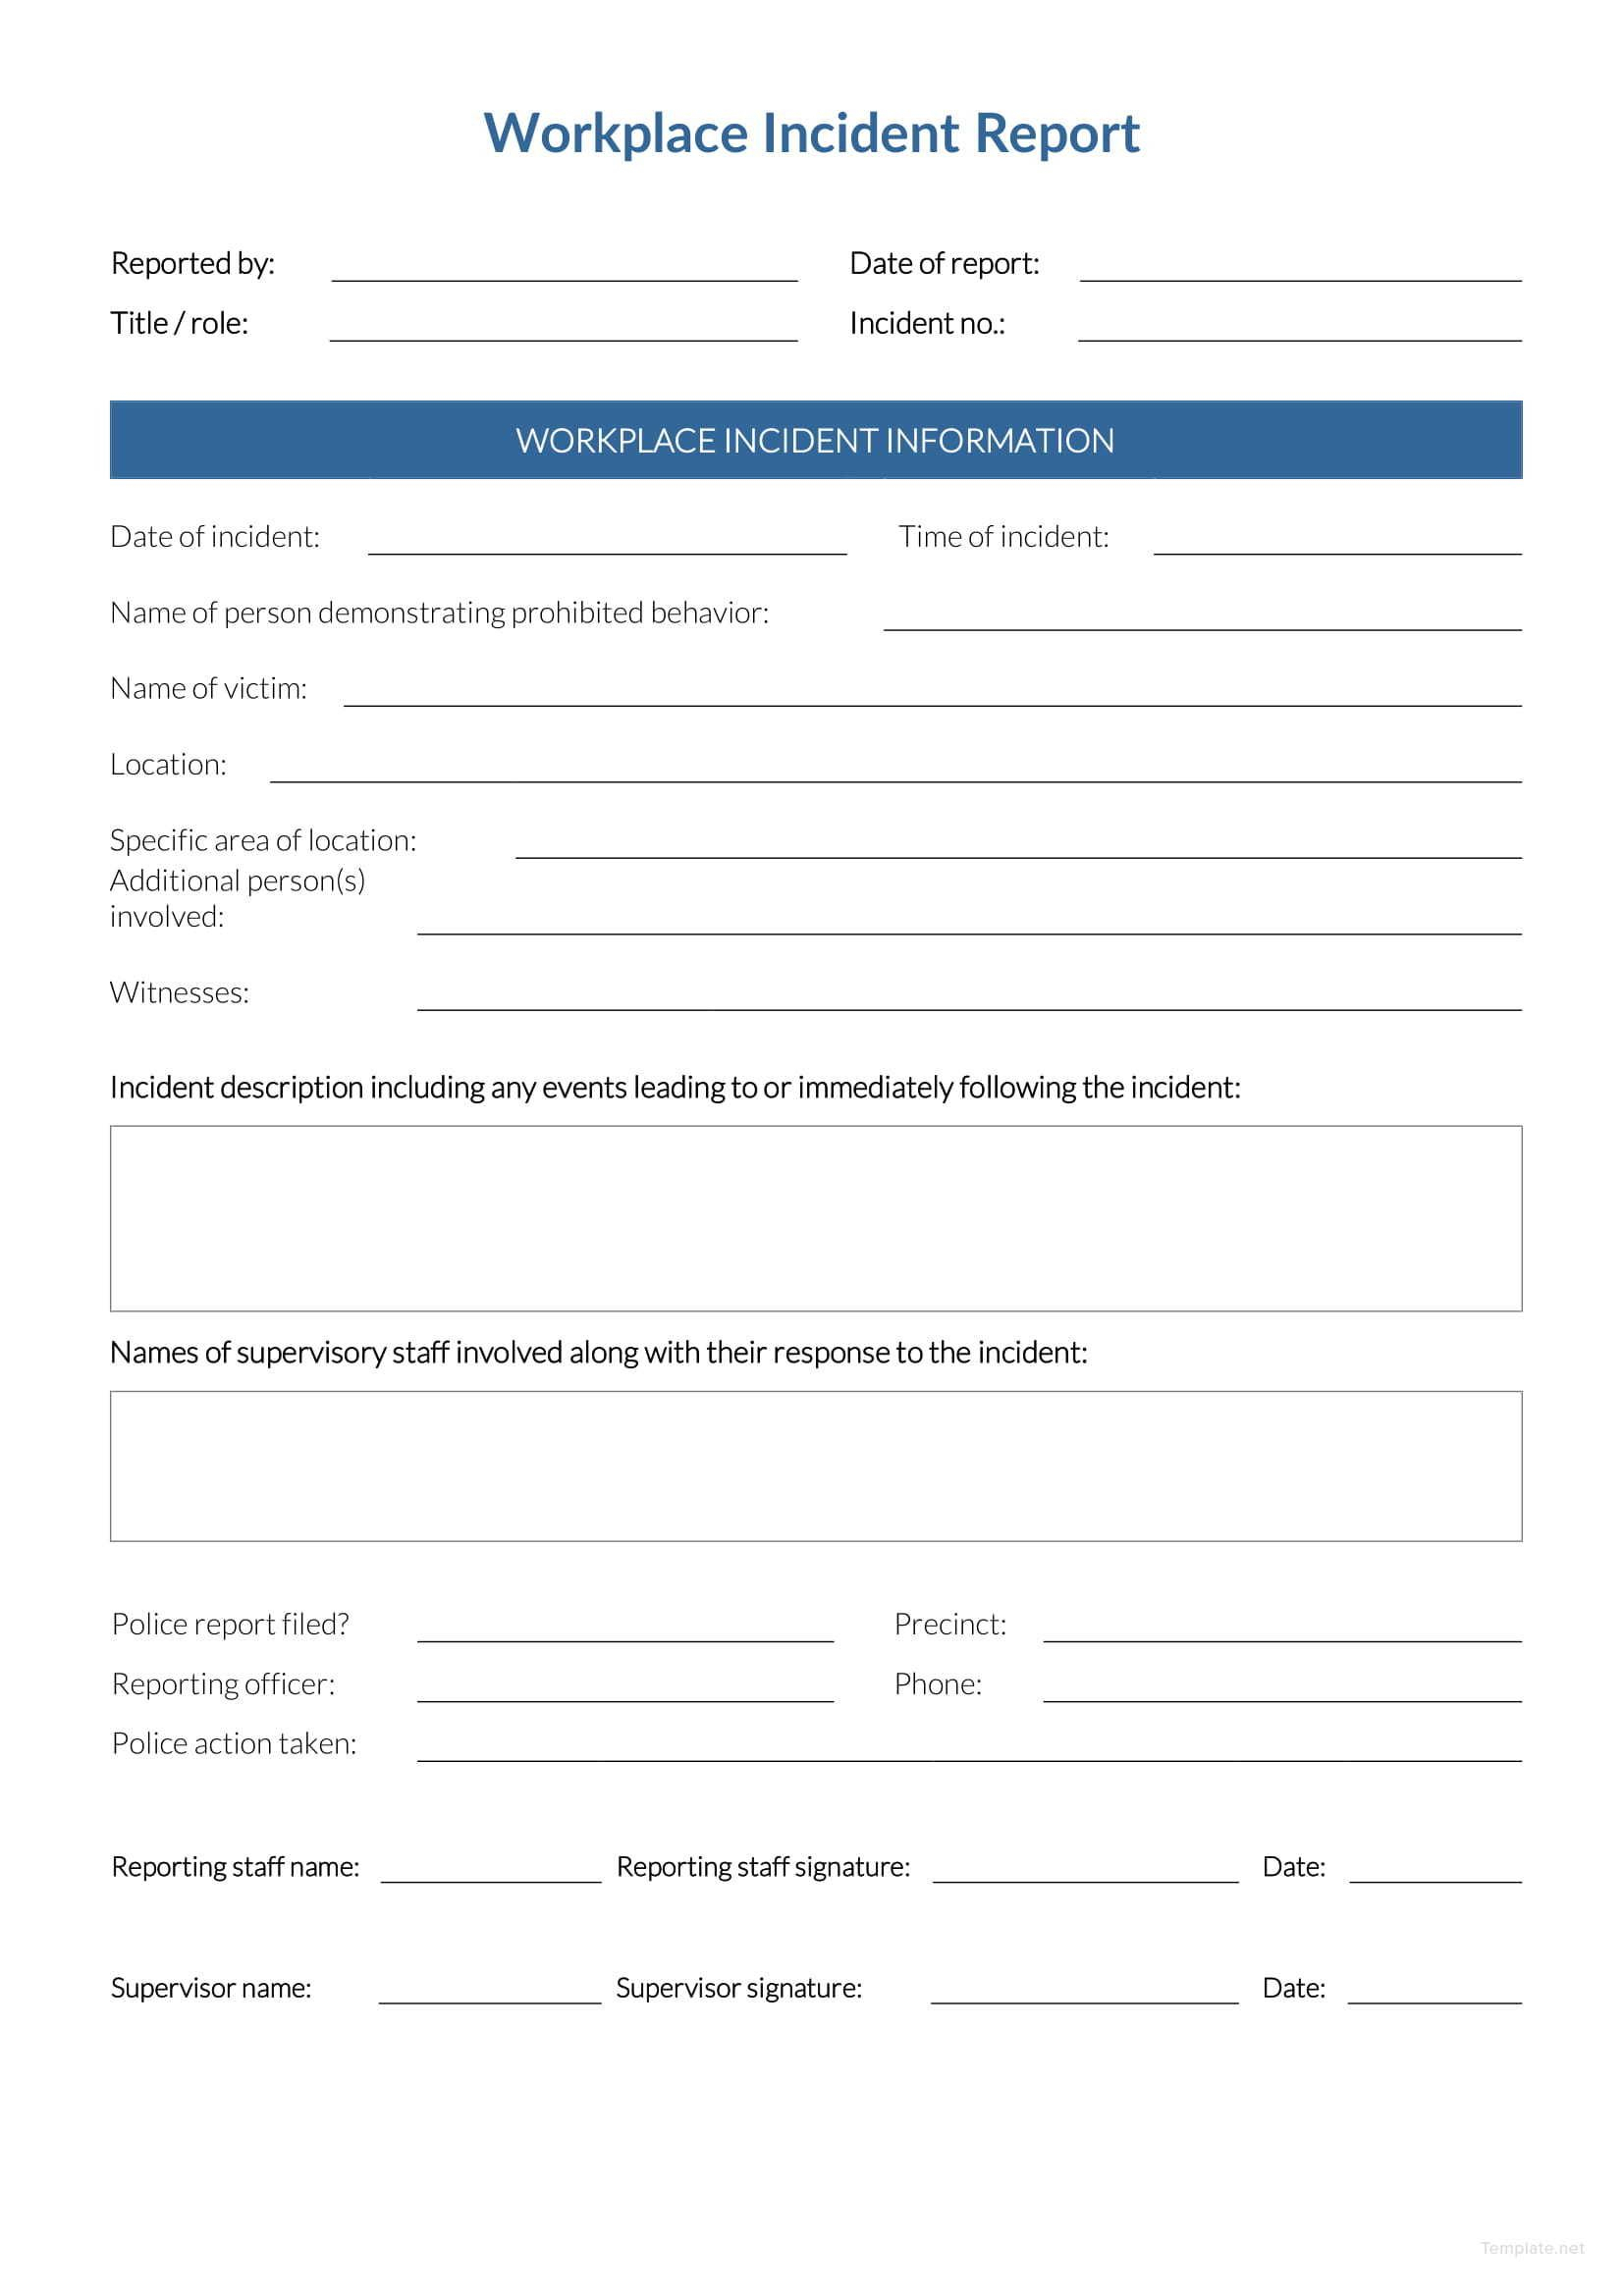 Free Workplace Incident Report | Incident Report, Report Within Incident Report Register Template